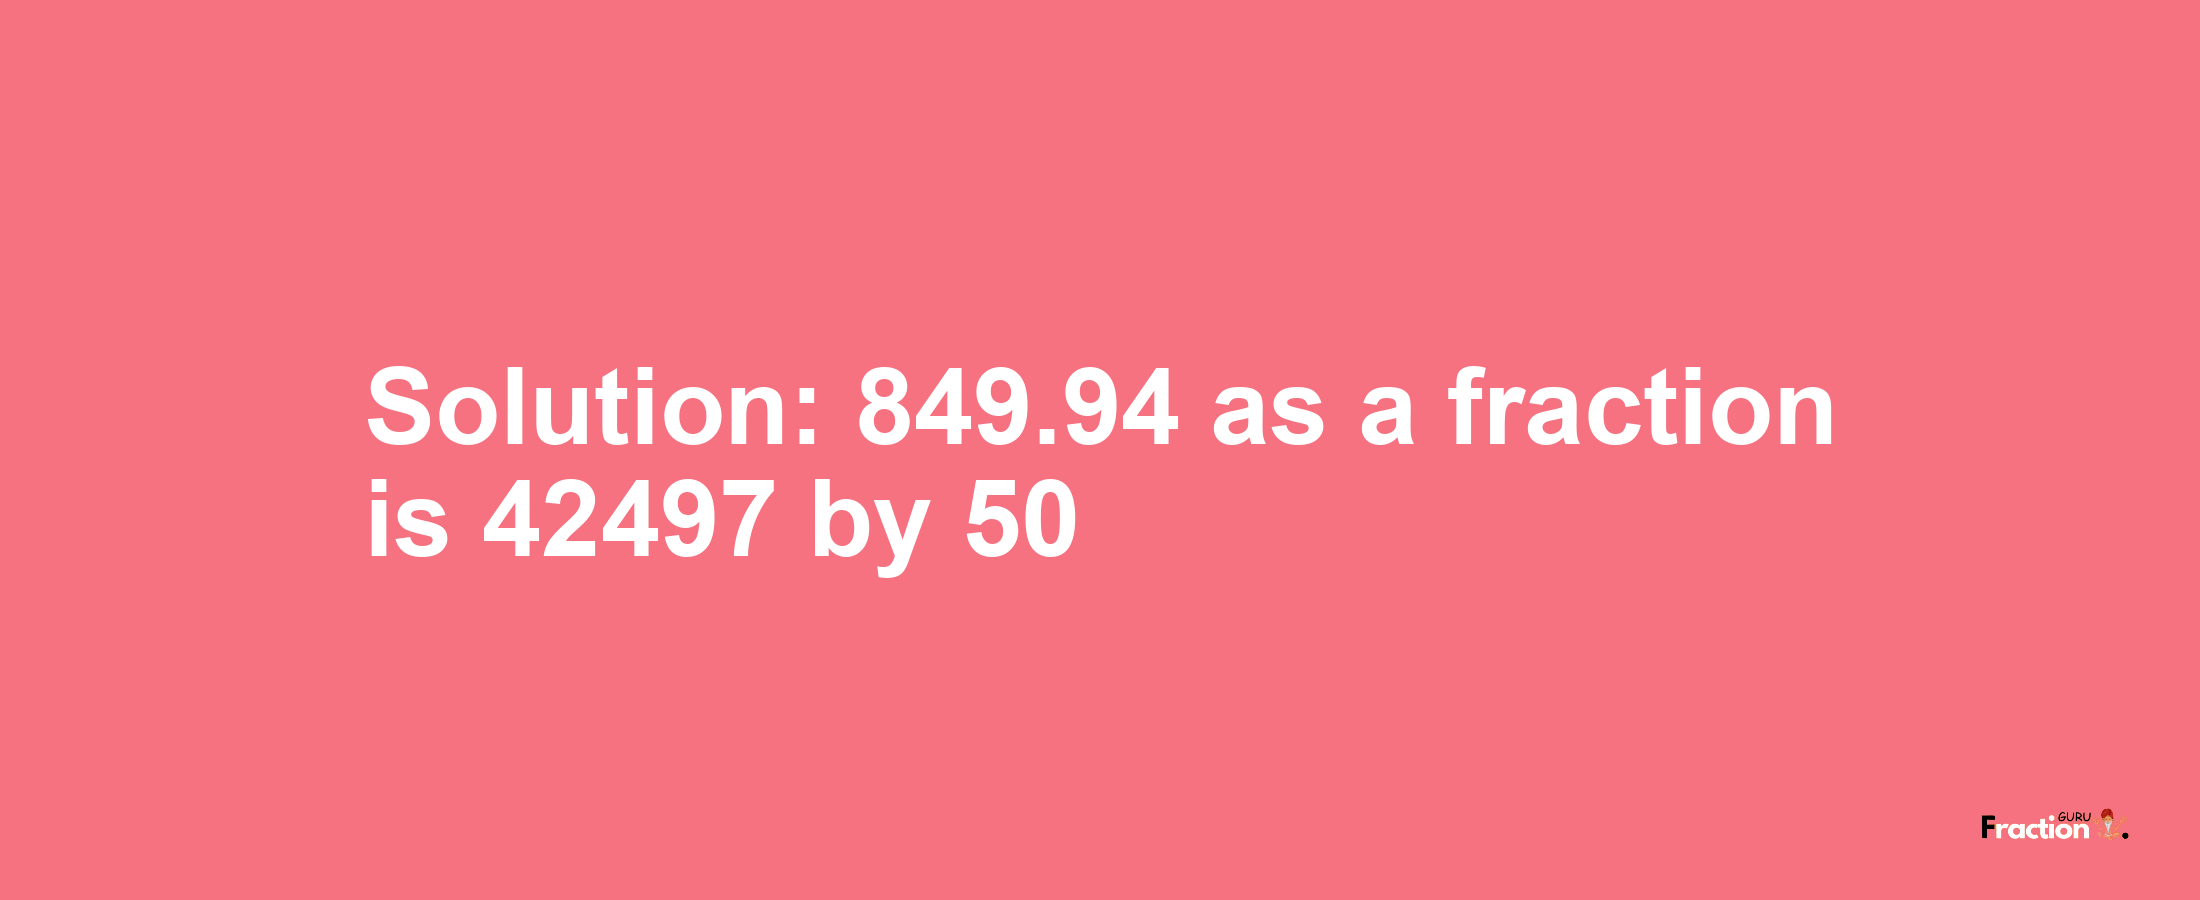 Solution:849.94 as a fraction is 42497/50